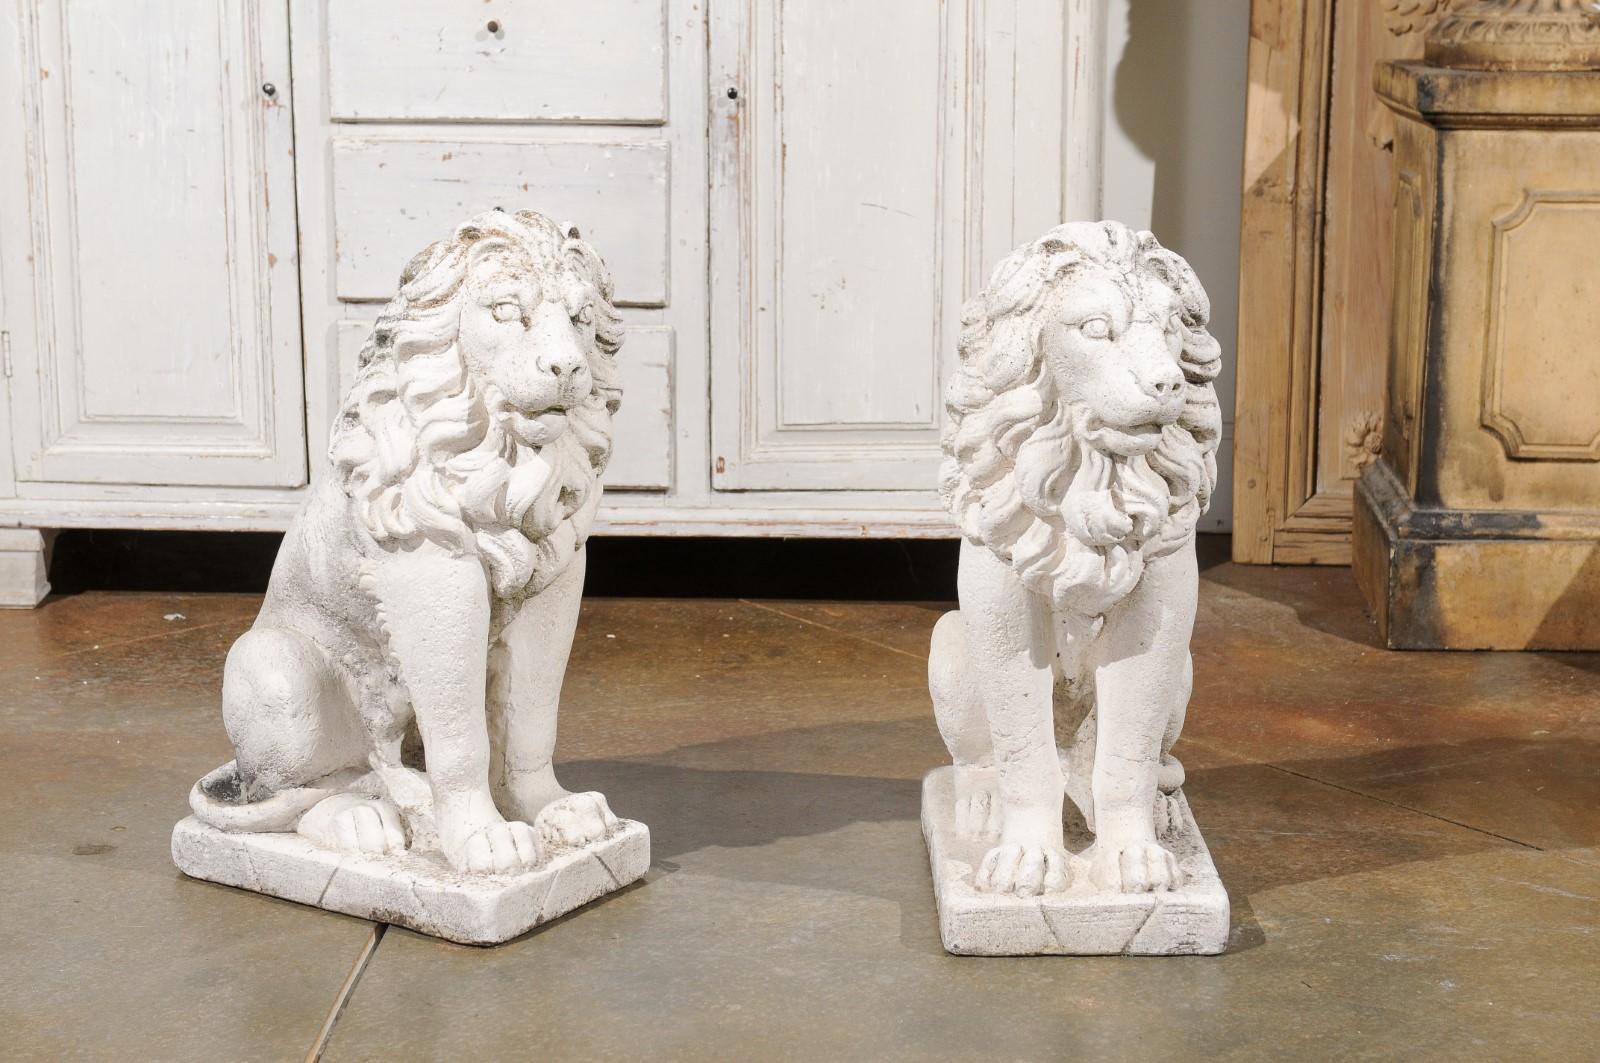 A pair of Italian reconstituted stone seated lions sculptures from the 20th century with great mane. Created in Italy during the 20th century, this pair of sculptures, made of reconstituted stone, features two lions seated in a calm pose. Our eyes